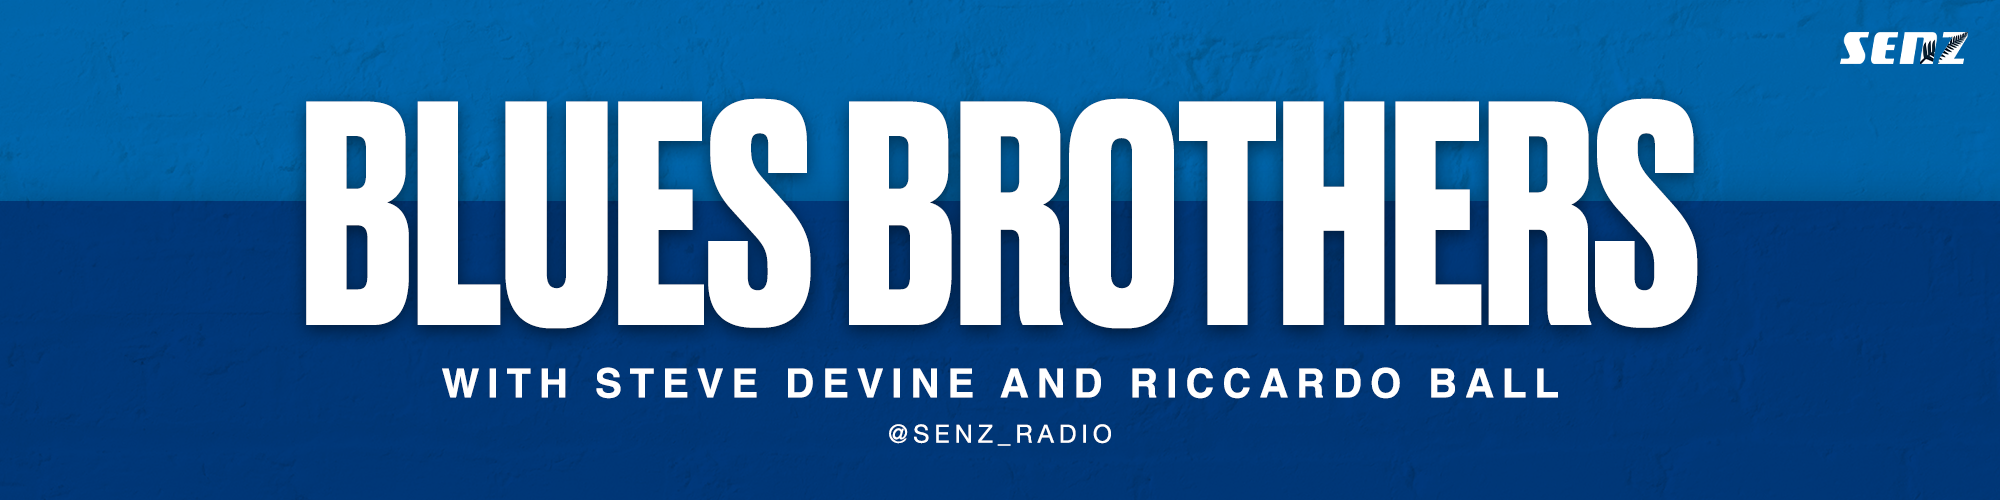 BluesBrothers Banner